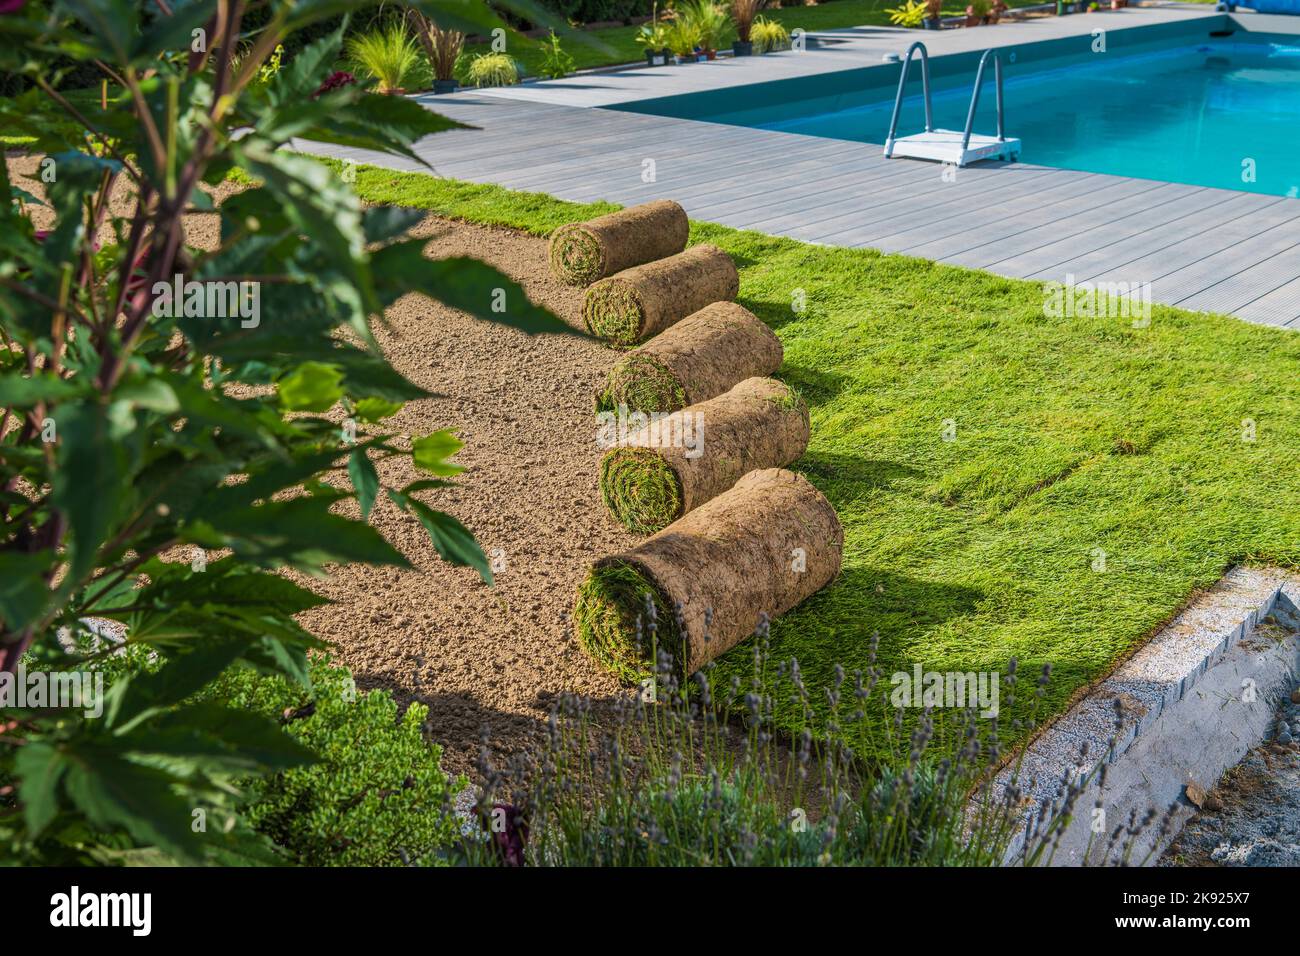 Turf Grass Rolls Laying on the Ground Ready to Be Installed. Roll Out Lawn in the Making. Outdoor Swimming Pool in the Background. Backyard Landscapin Stock Photo